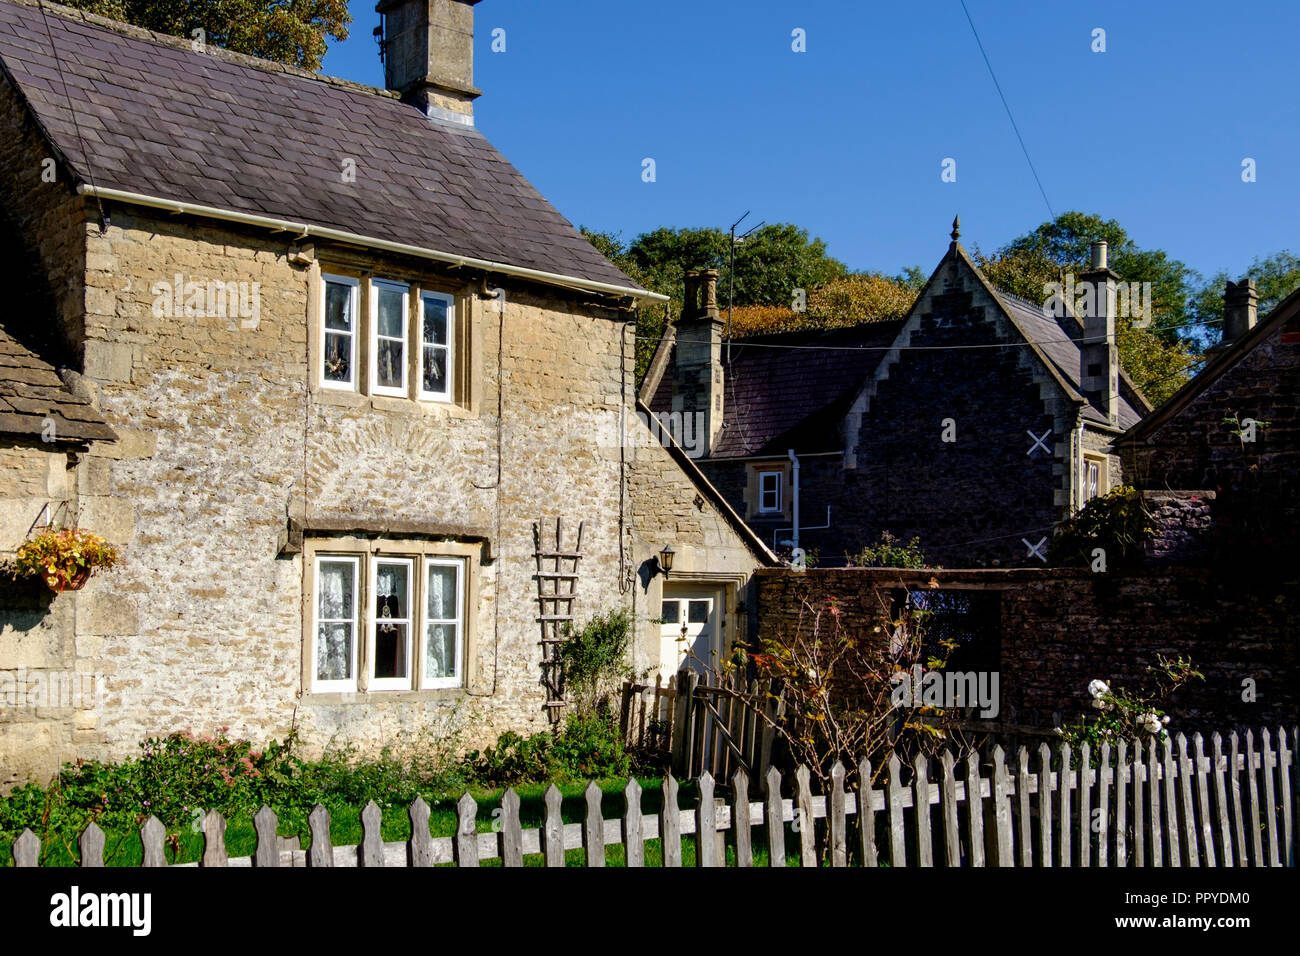 Corsham a small town in wiltshire near chippenham, England UK Stock Photo